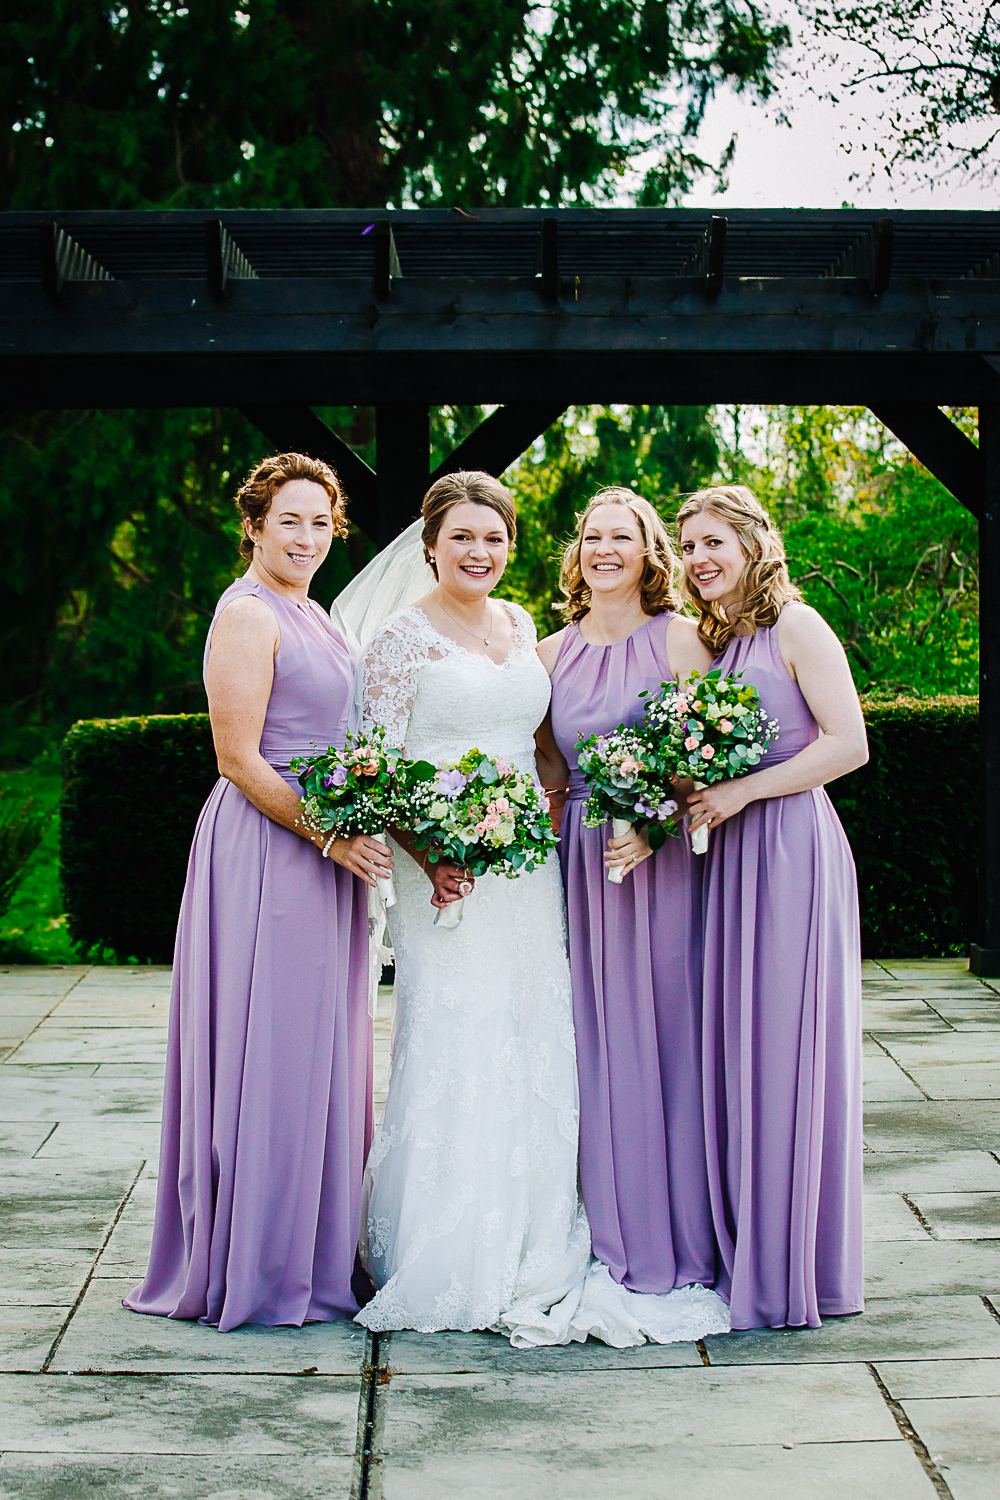 Bridesmaids in Lilac Dresses at Swynford Manor Wedding